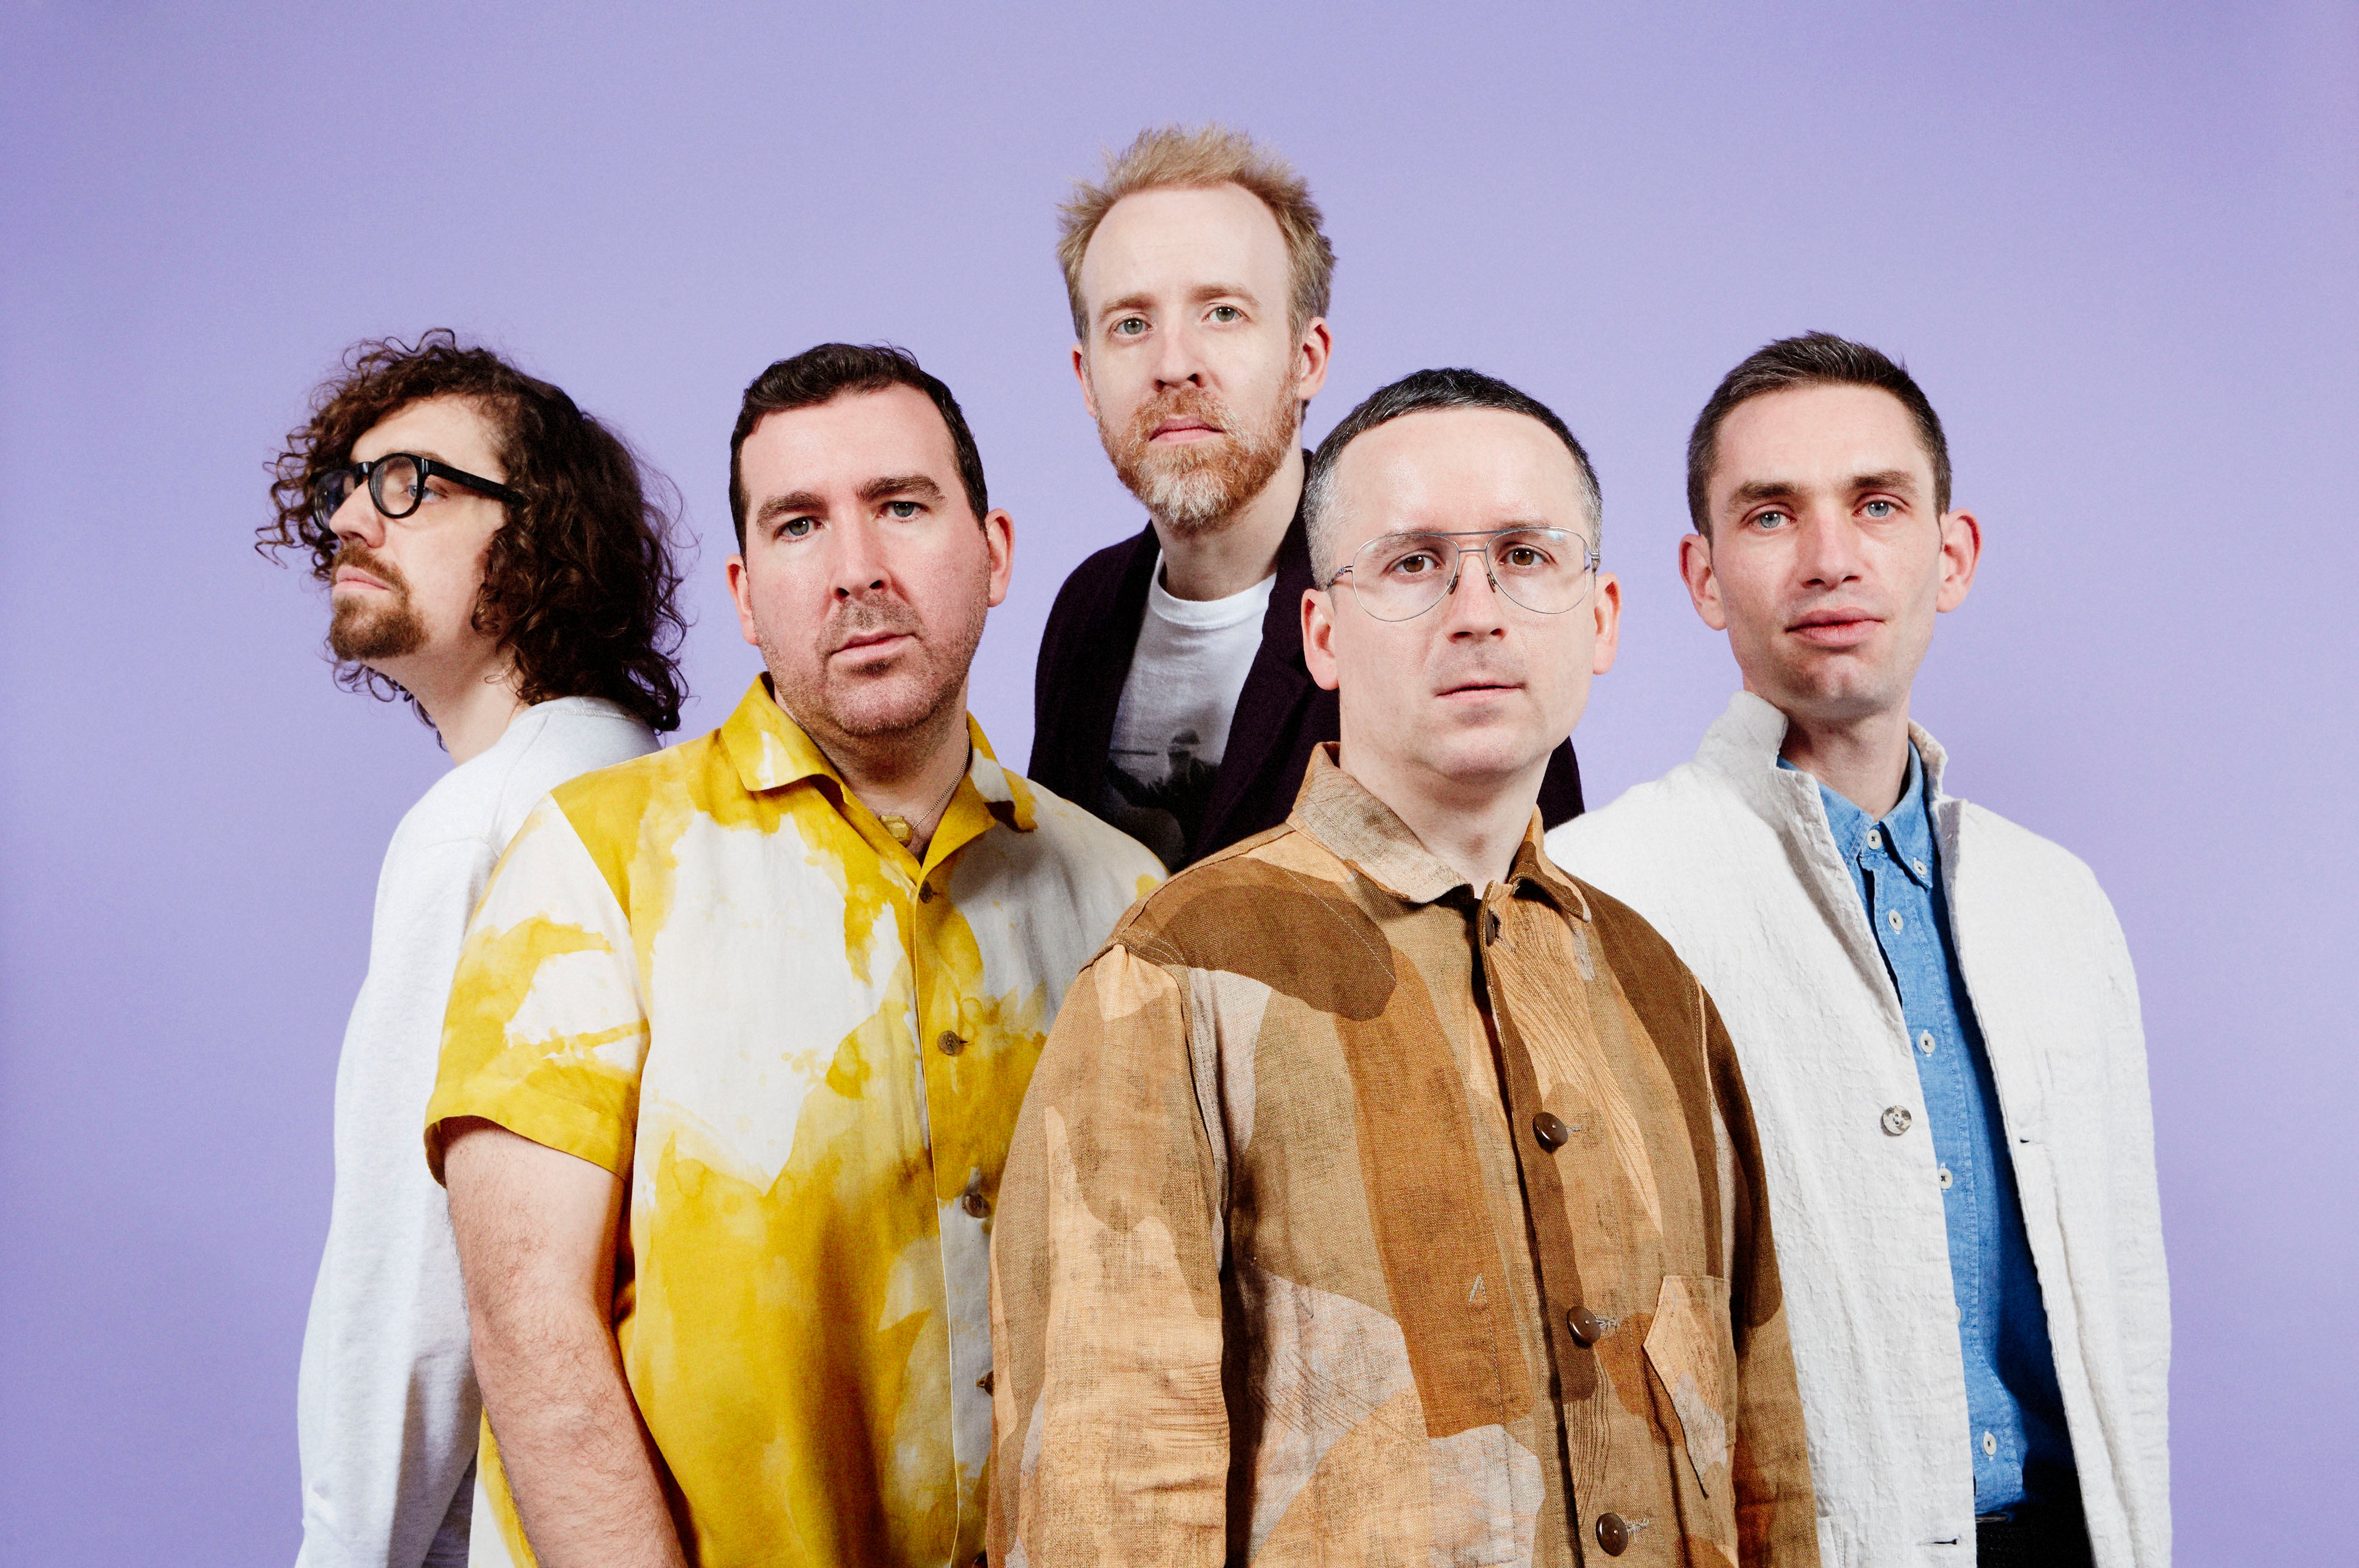 Hot Chip: "A Bath Full of Ecstasy" Out Now!